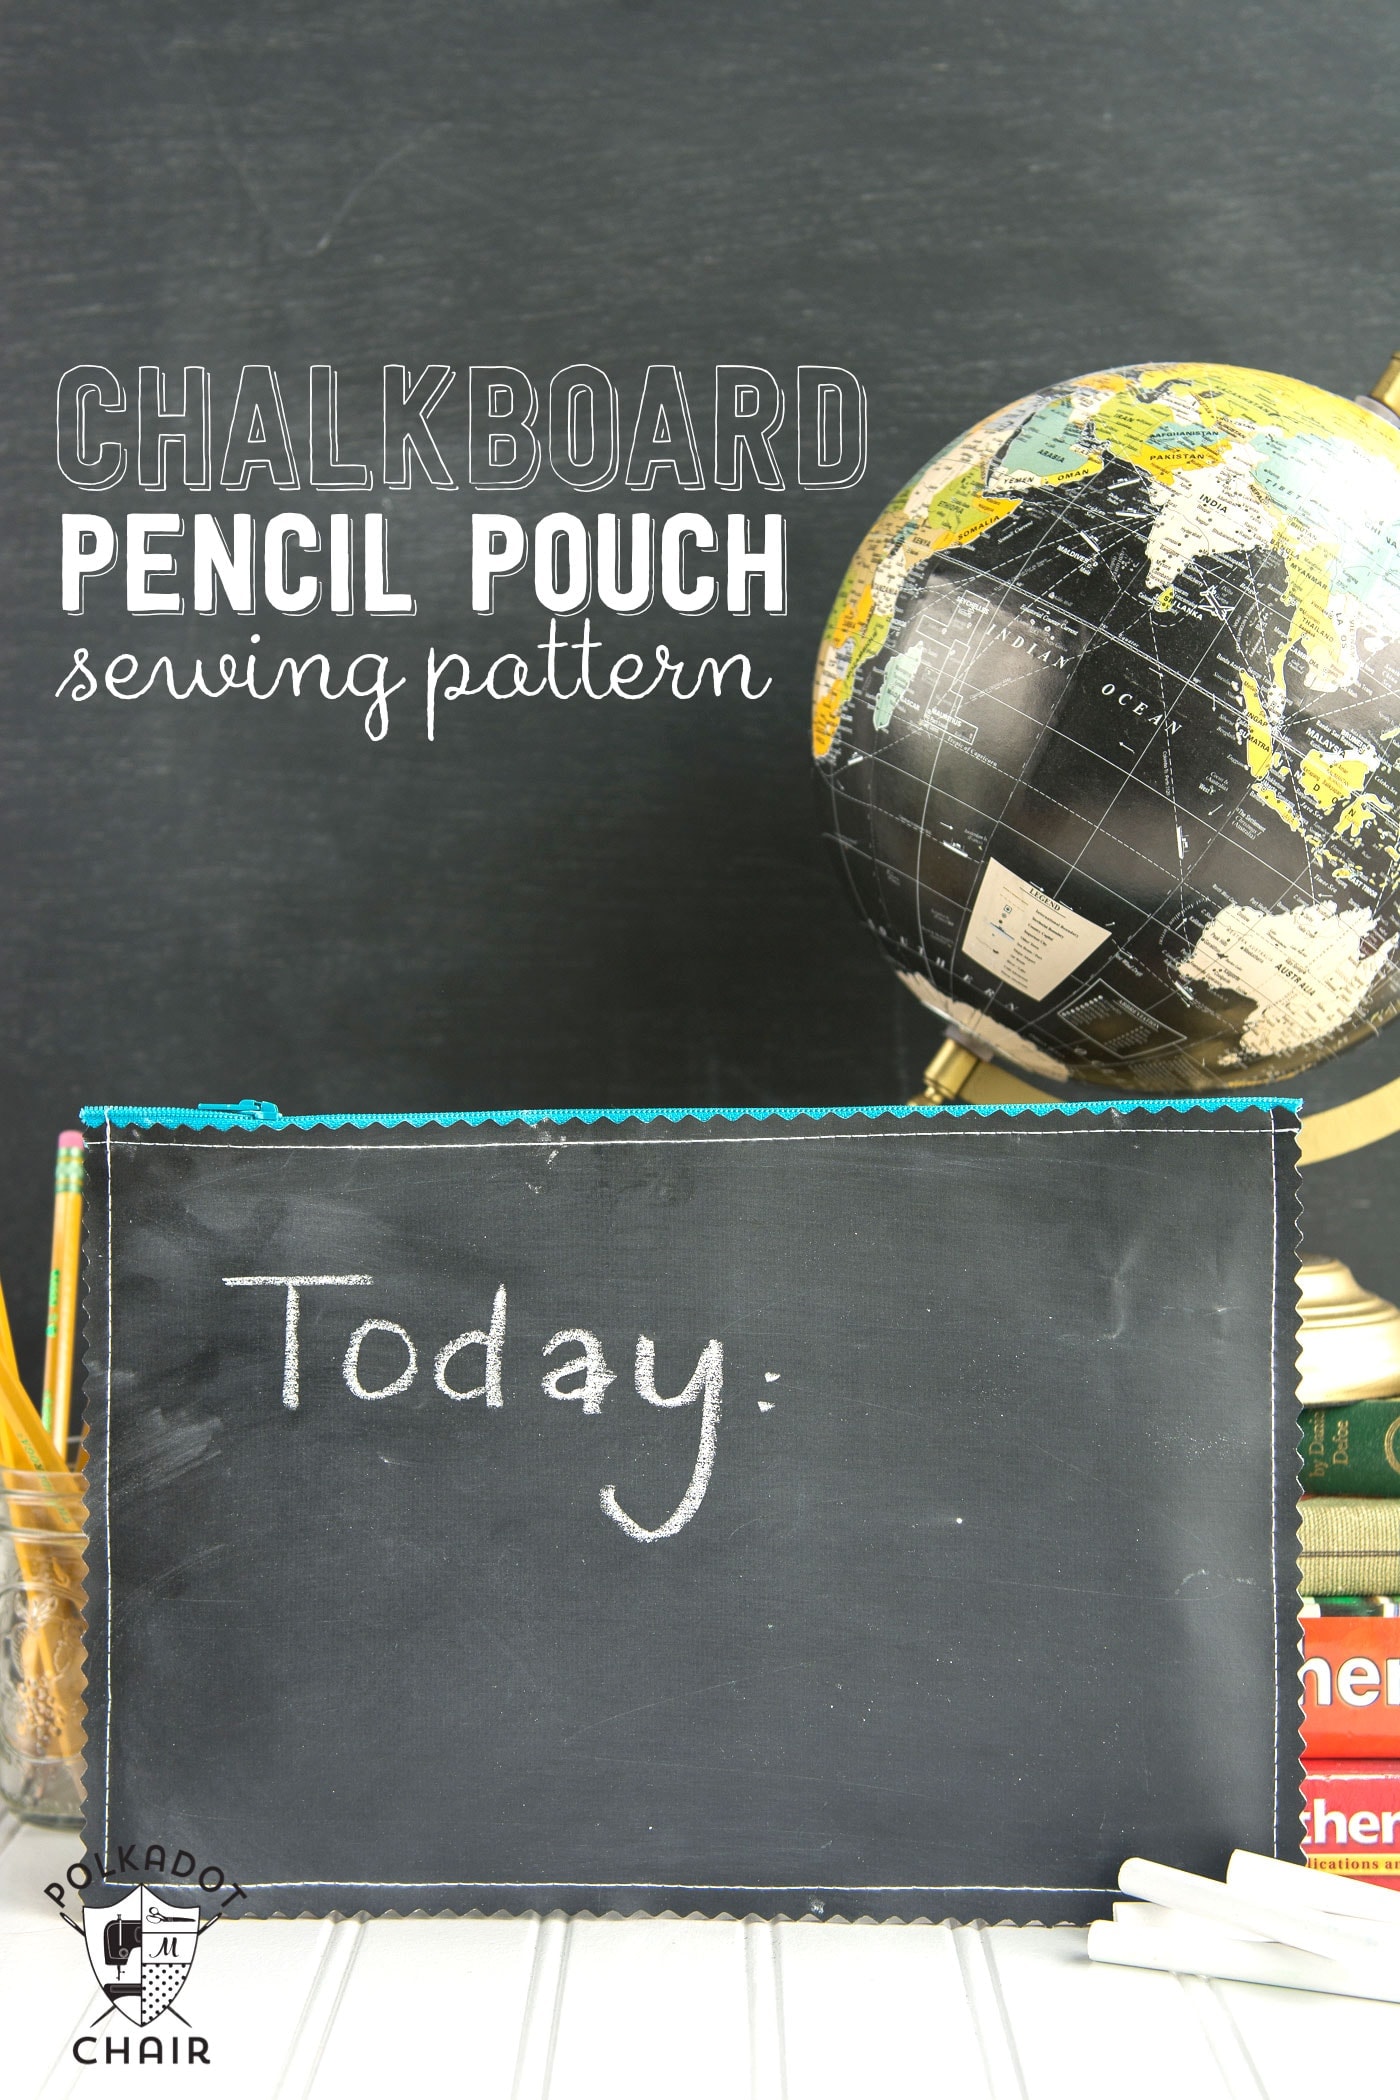 Chalkboard Fabric Pencil Pouch Sewing Pattern